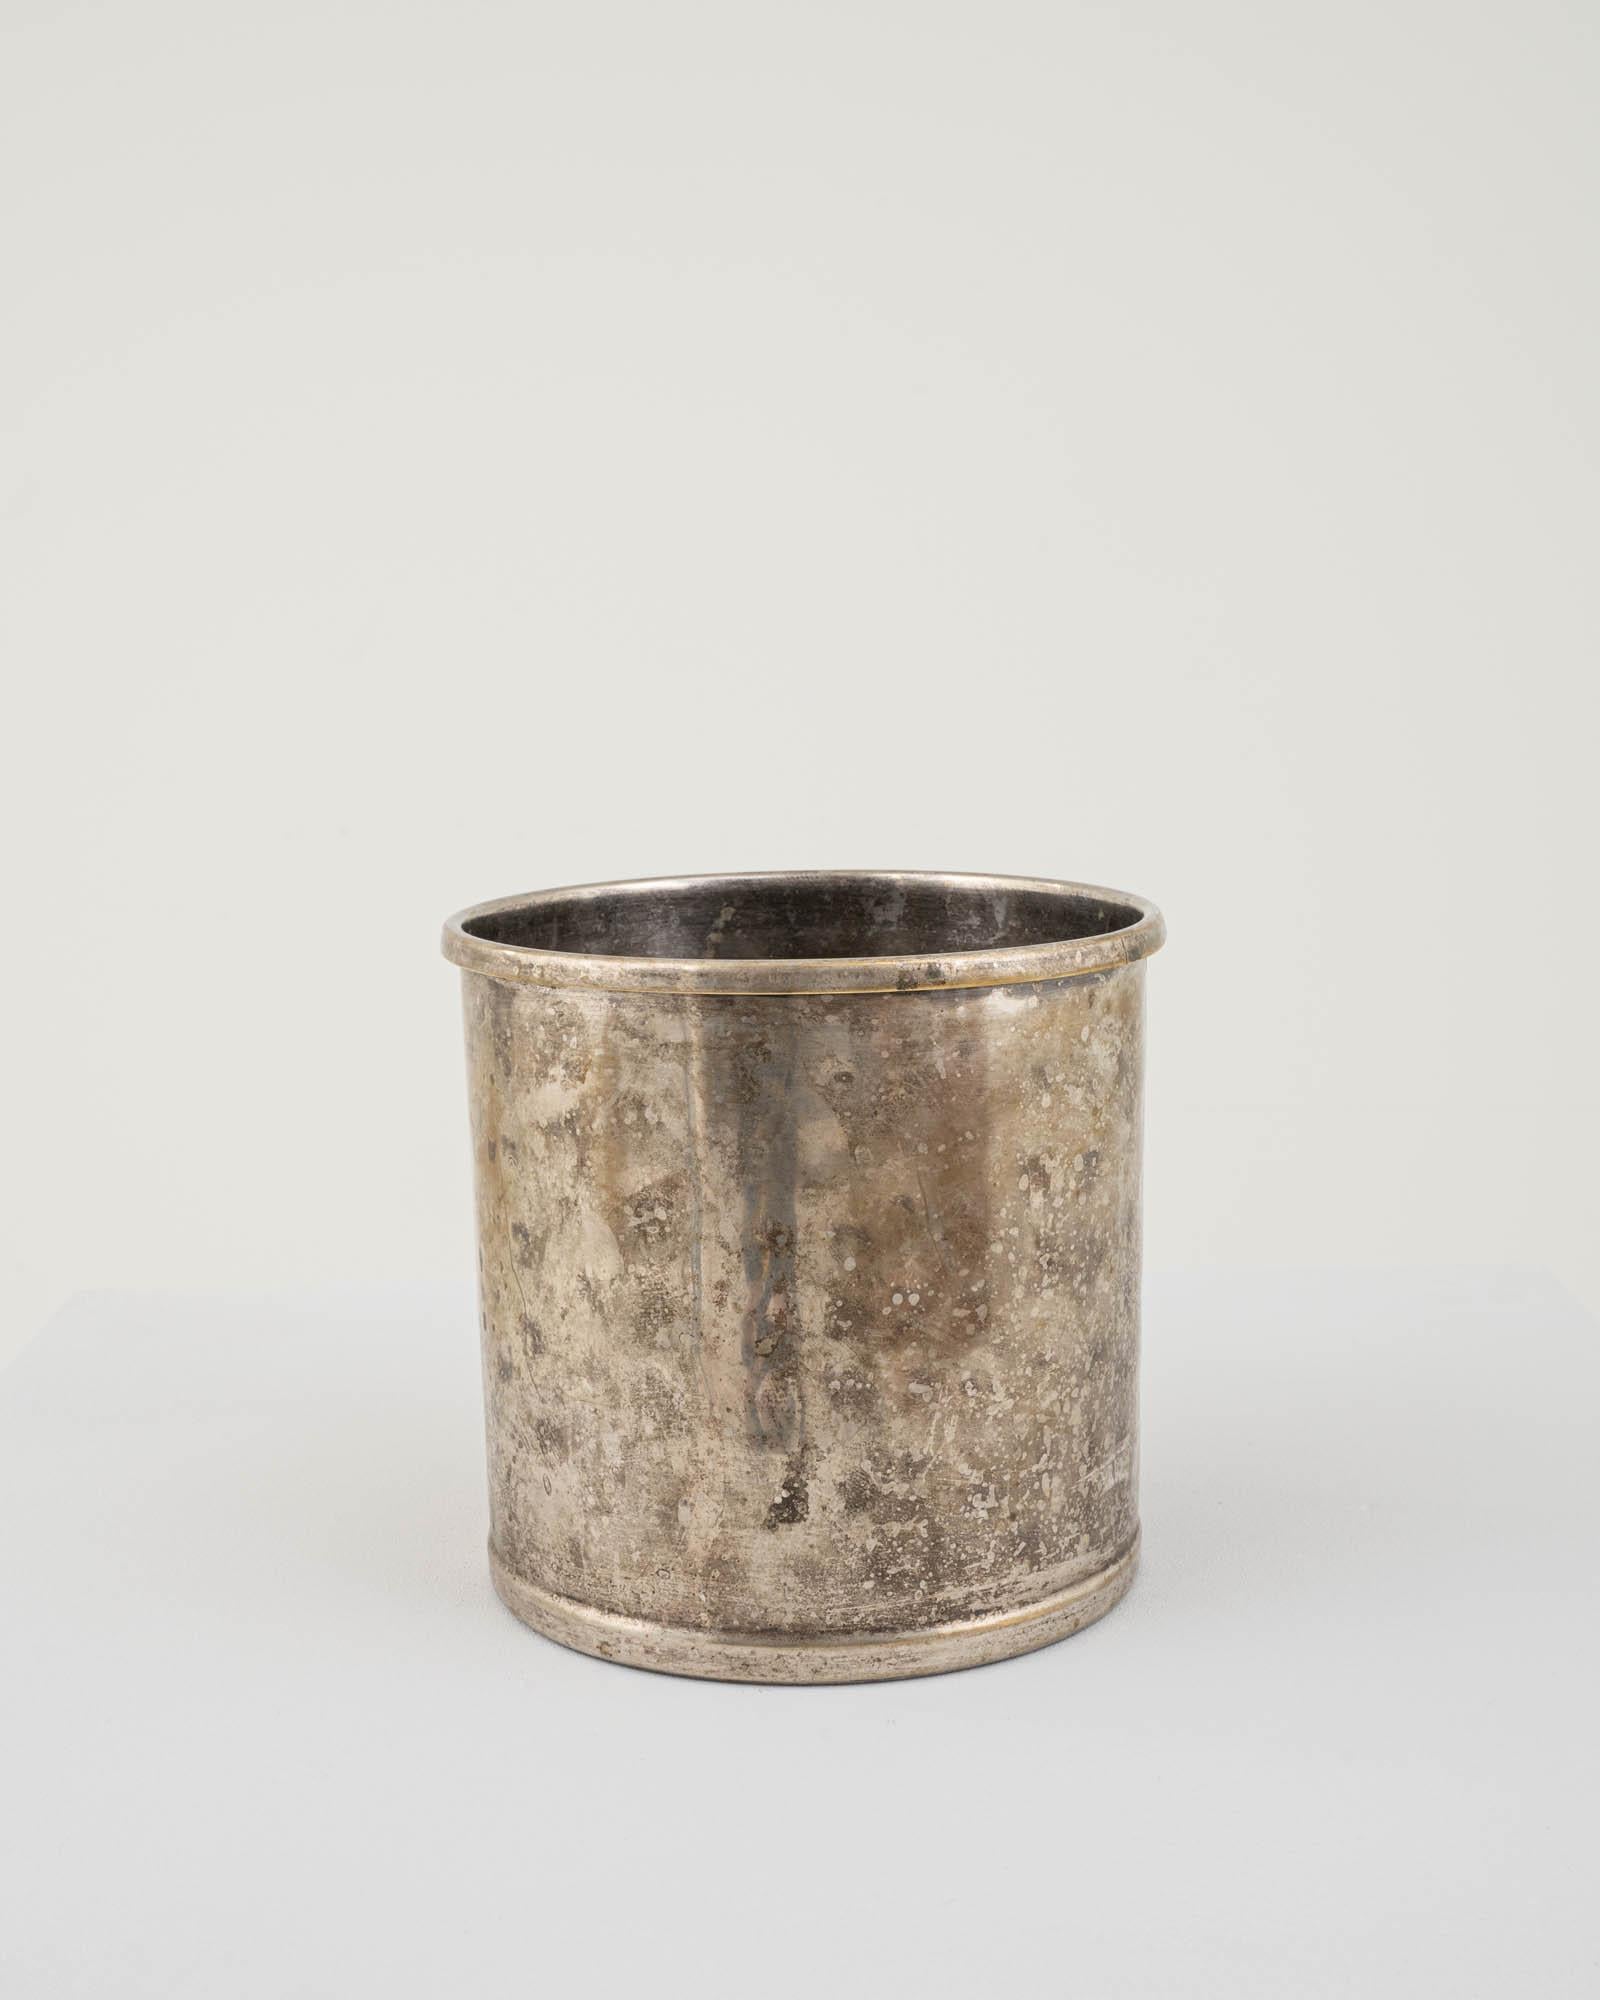 This vintage ice bucket evokes the glamorous parties of yesteryear. From before the era of refrigeration, this was an essential appliance for every party or quiet evening refreshment. Made in France in the 20th century, this bucket was likely used